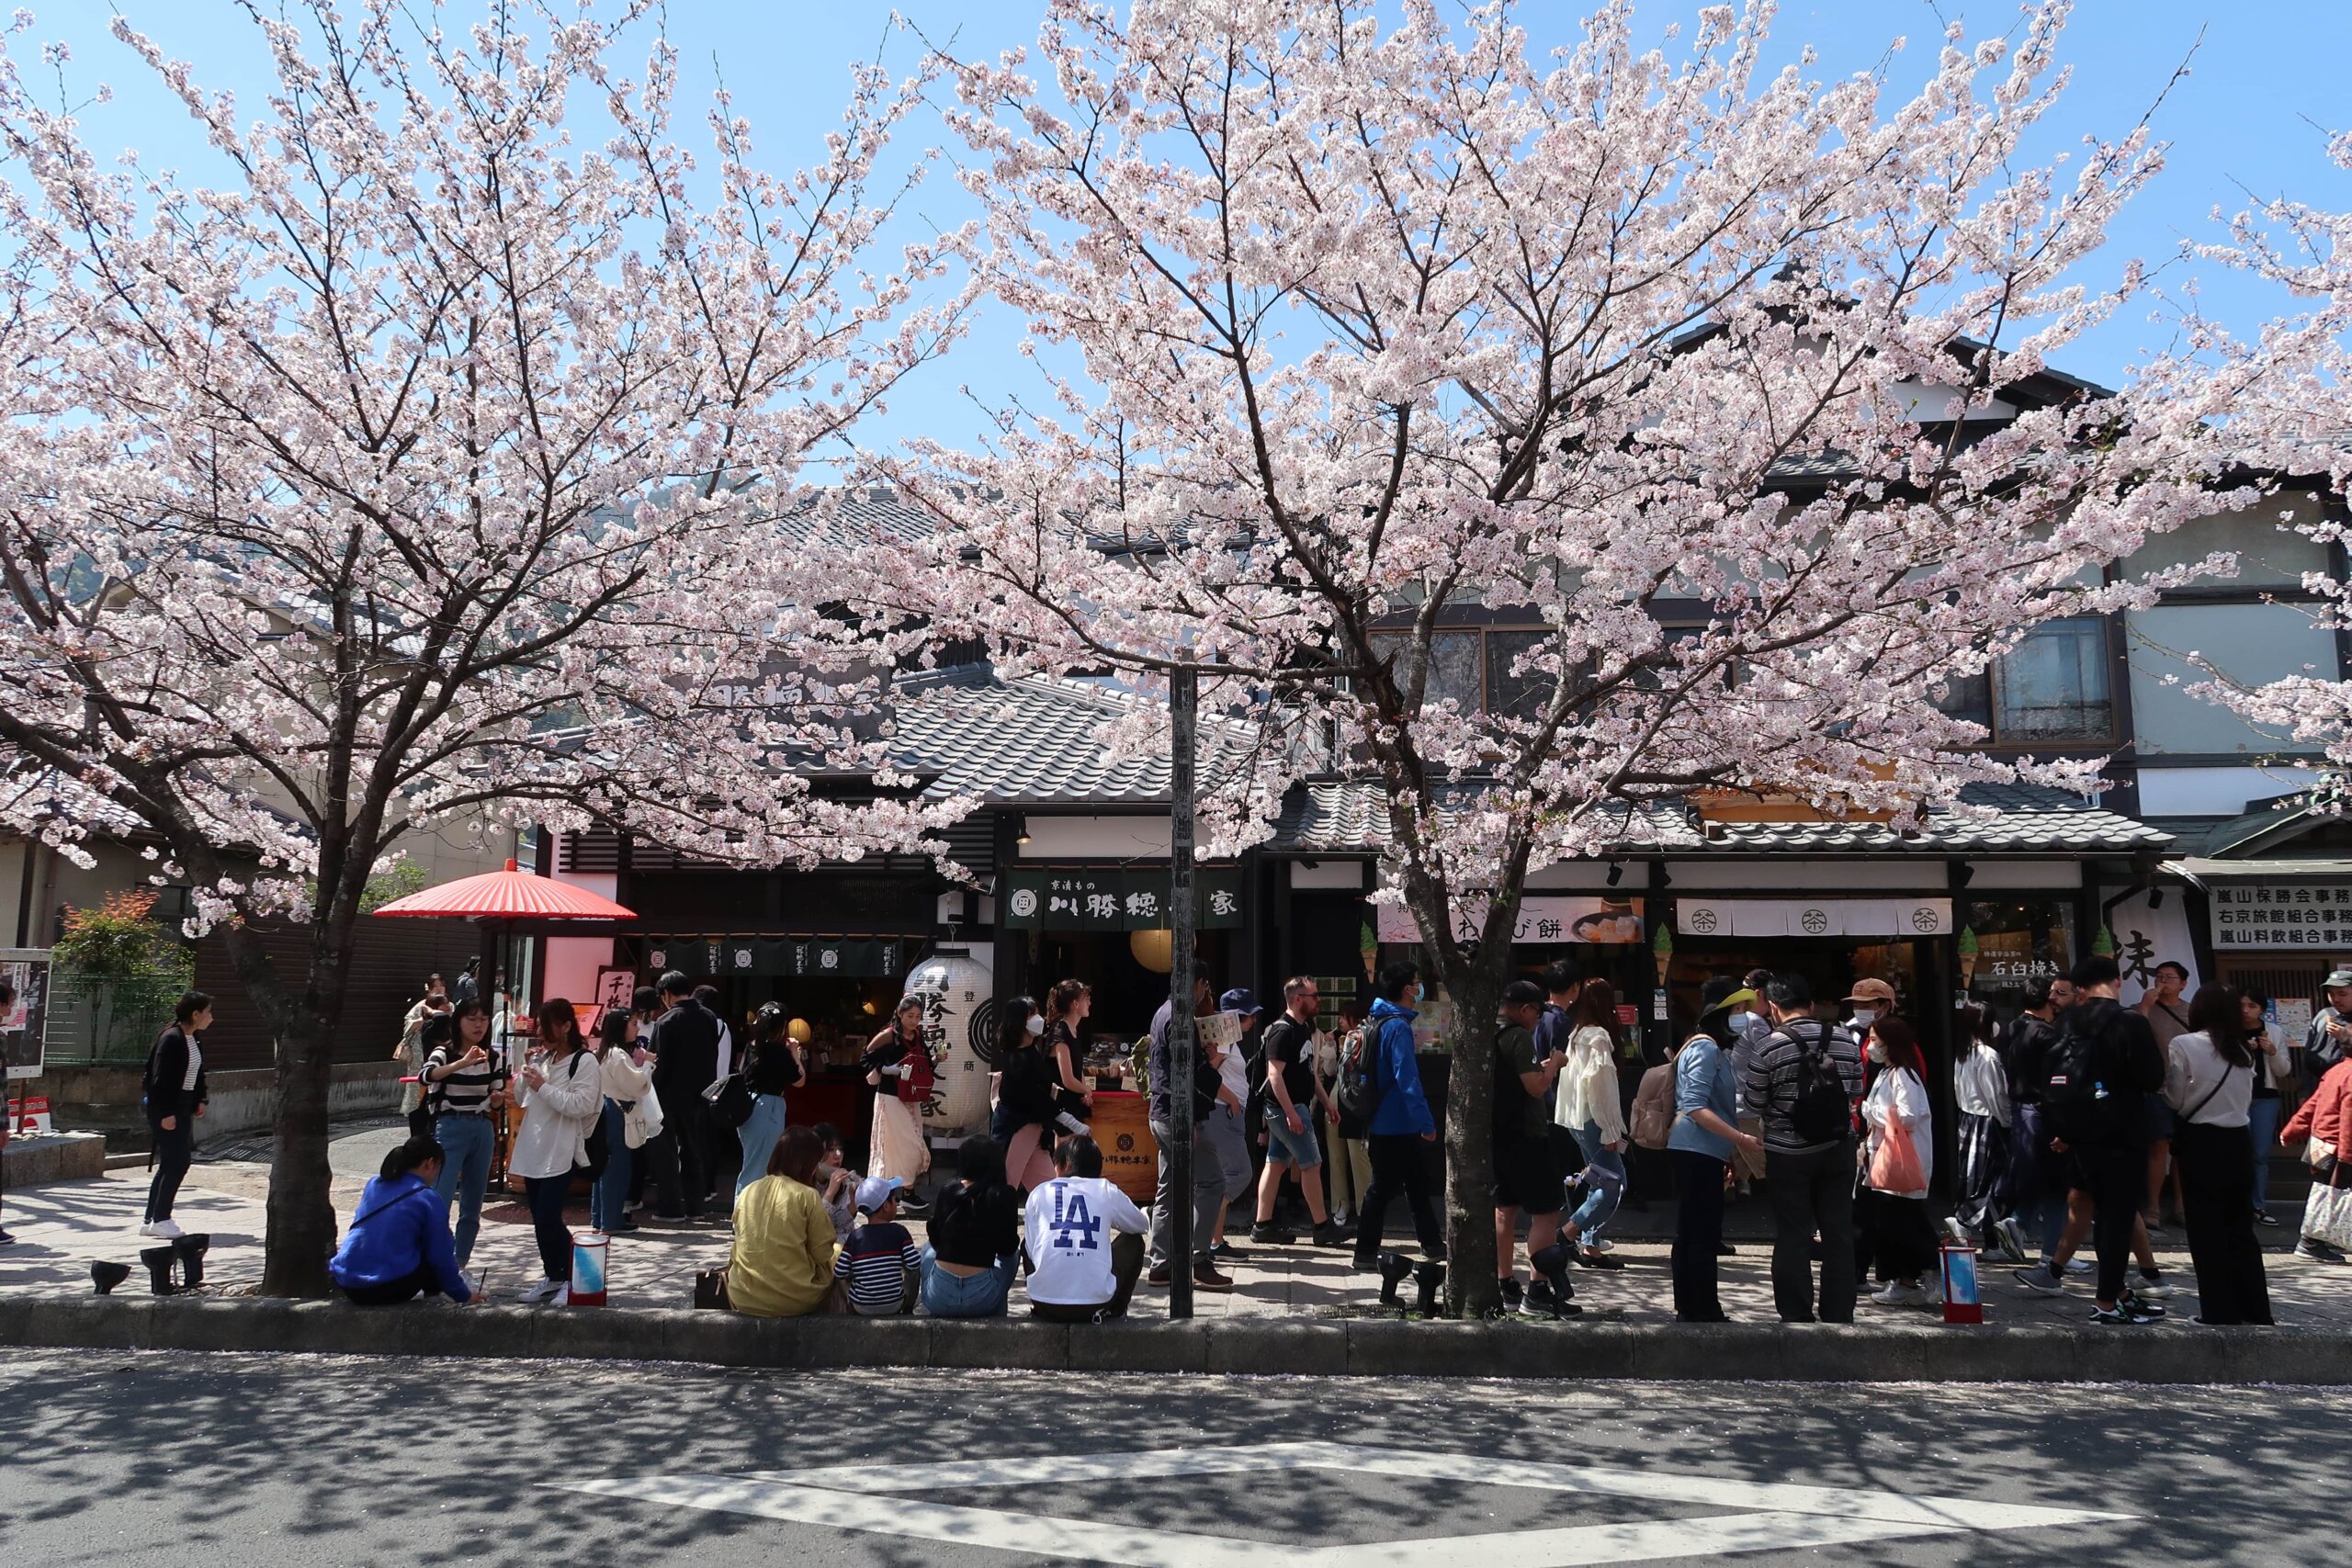 Arashiyama station kyoto monkey park things to see and do where to find cherry blossoms in japan